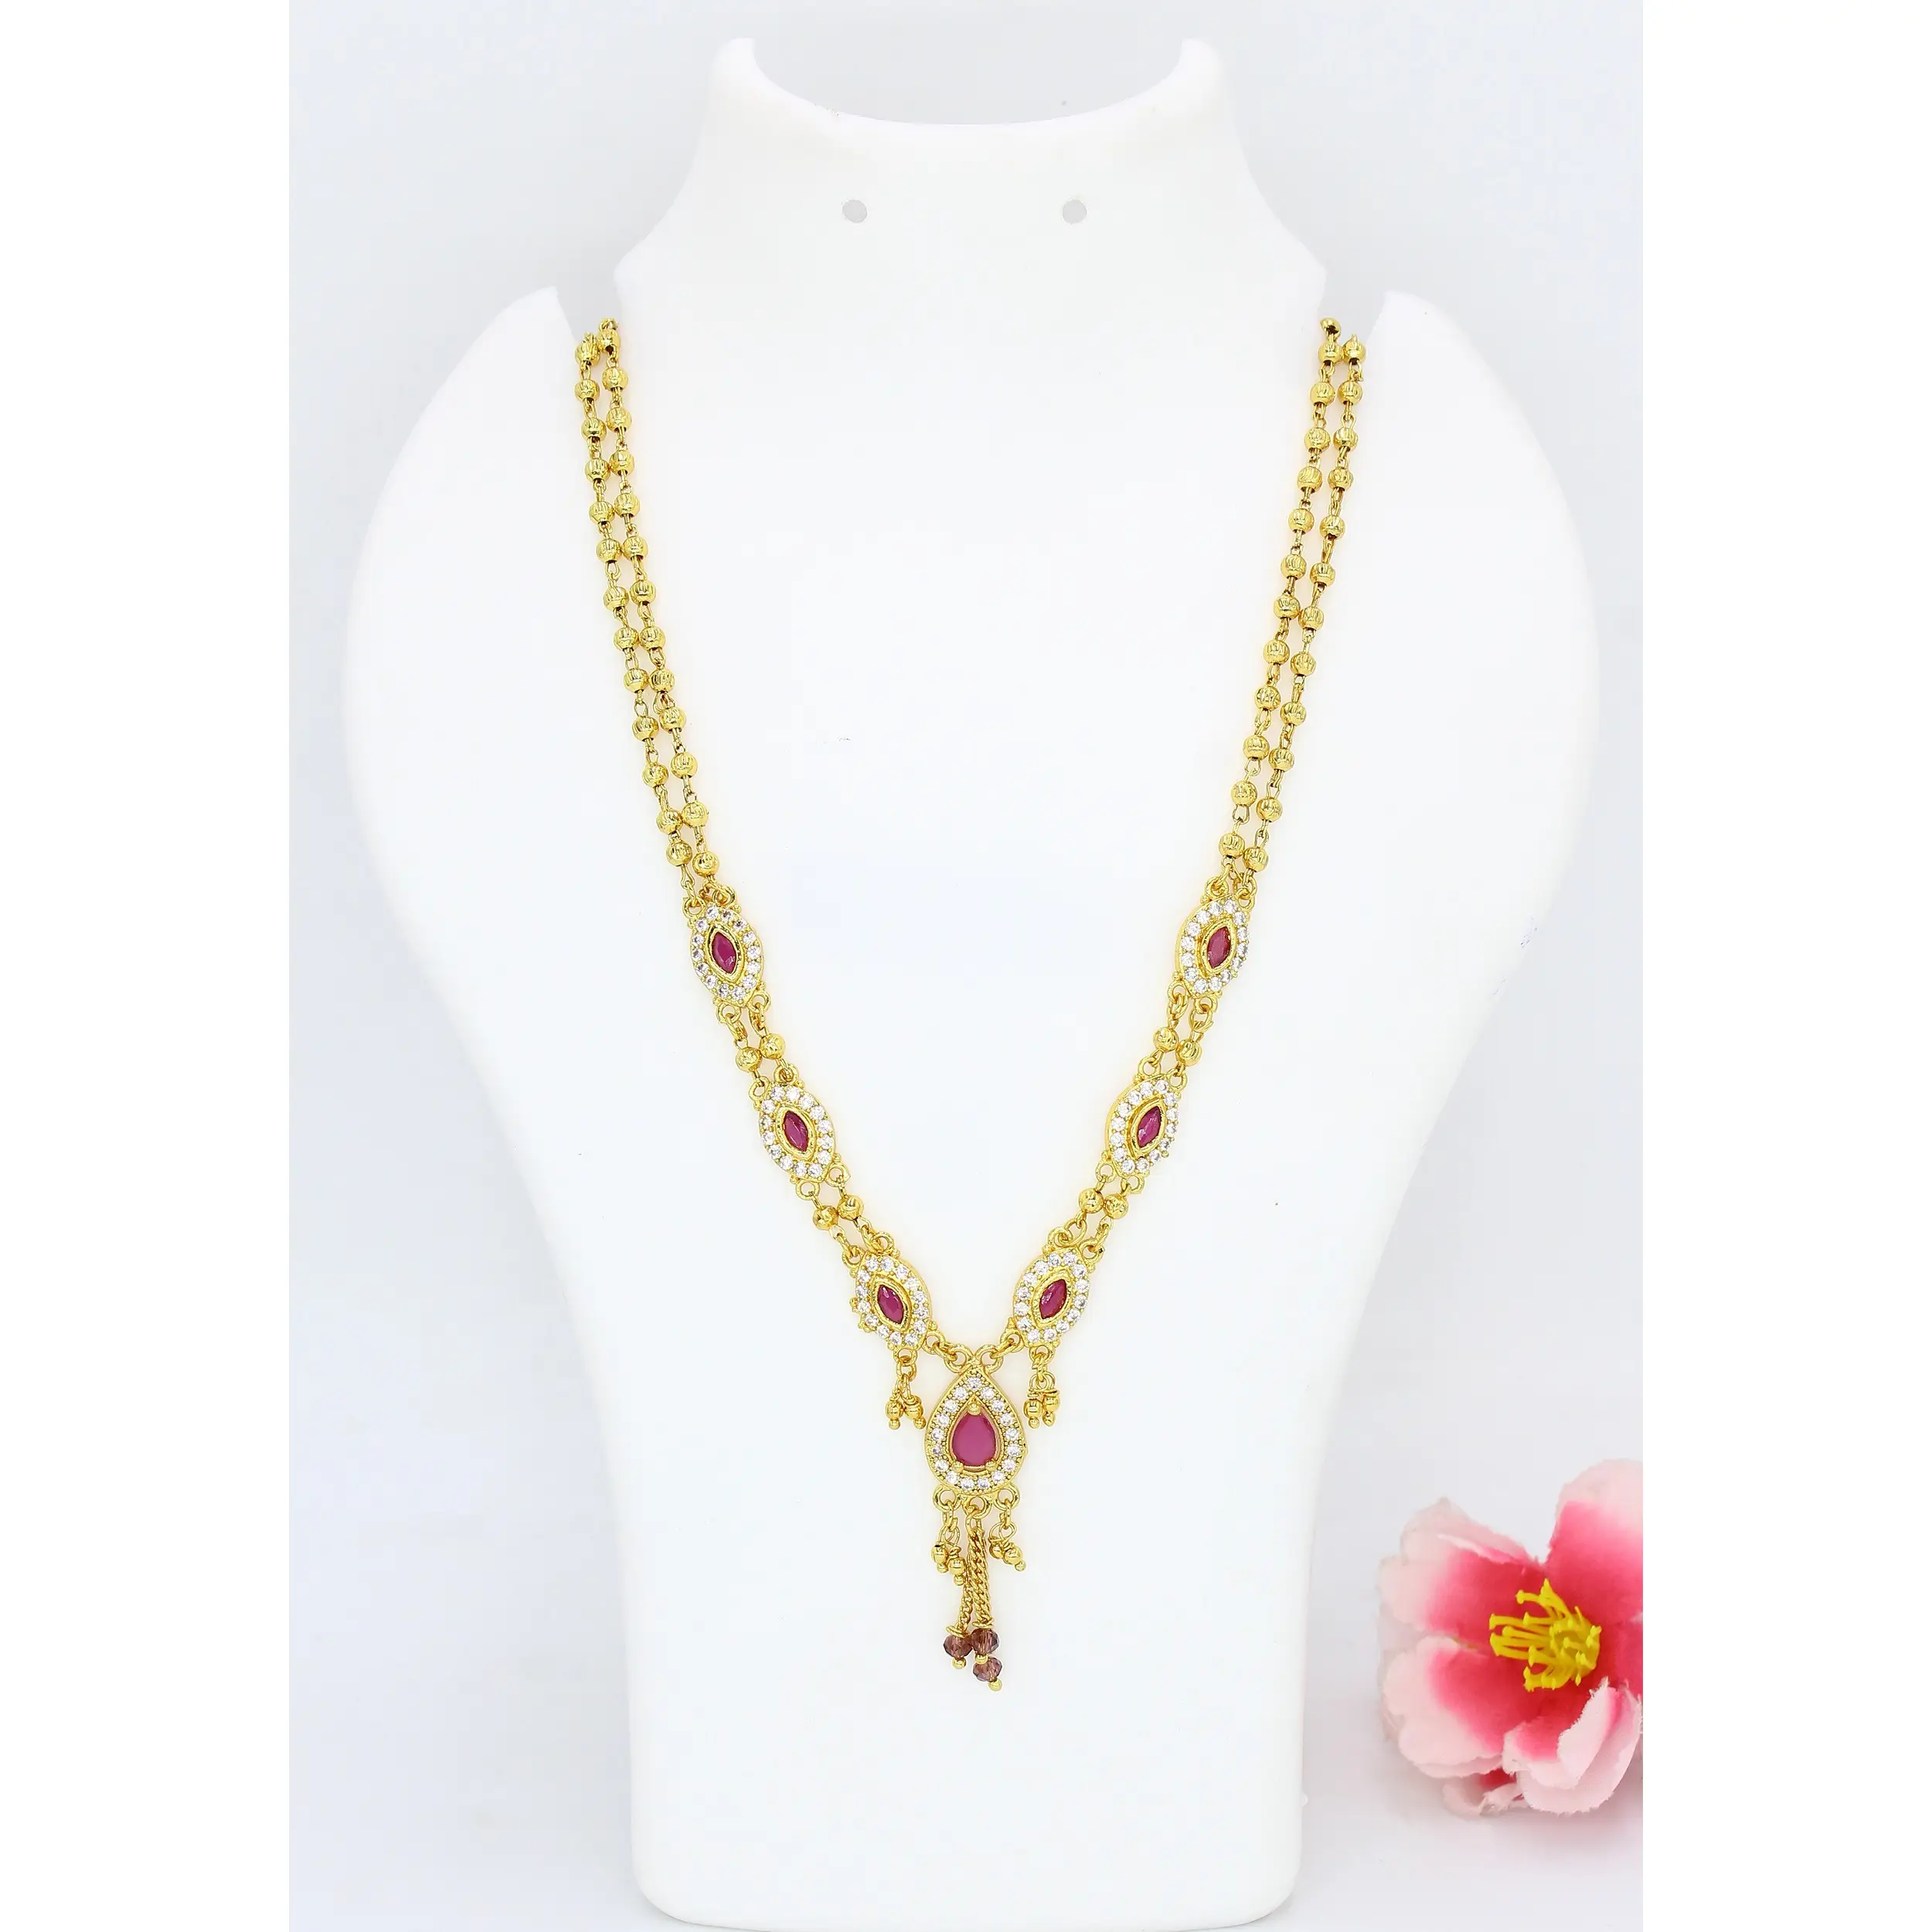 High Quality Gold plated AD Jewellery Indian UAE USA Dubai Necklace chain Bridal jewelry sets for women Daily Wear